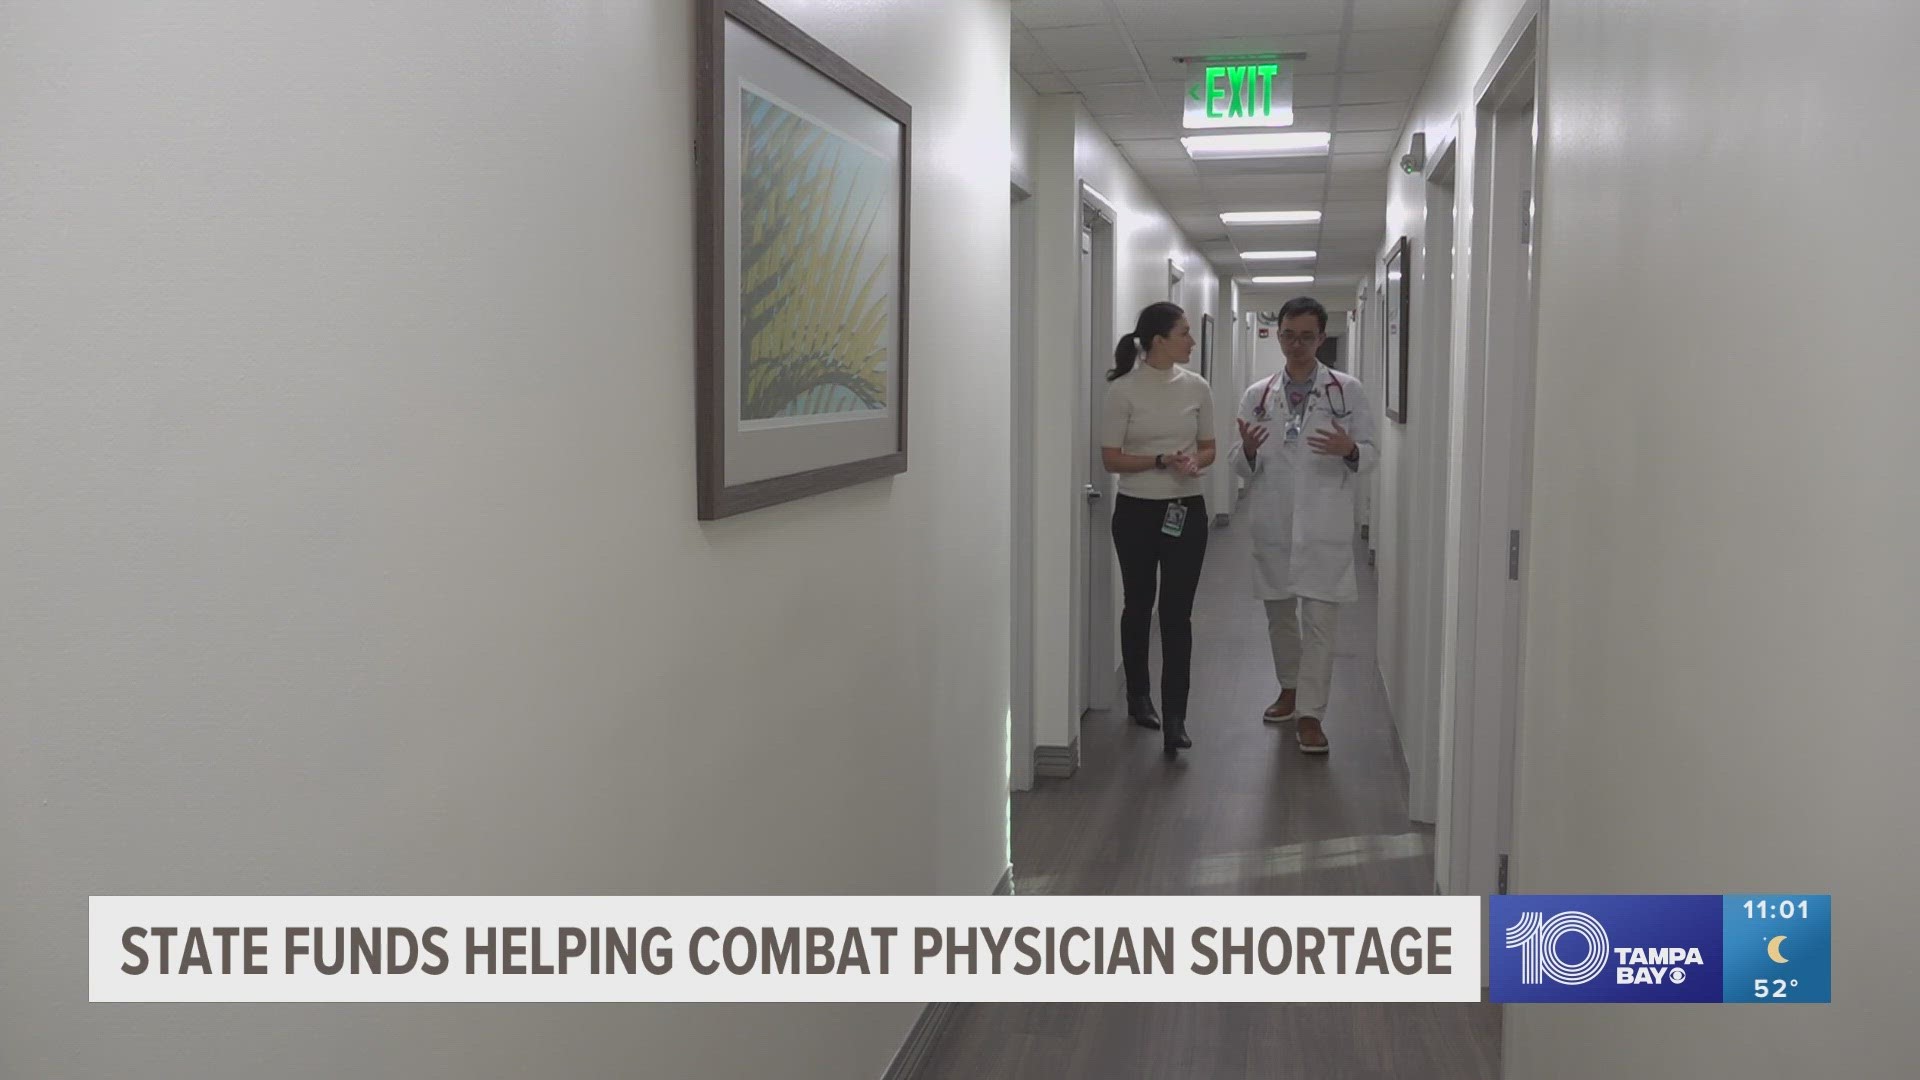 An effort to get critical care to people across the Tampa Bay area is underway.